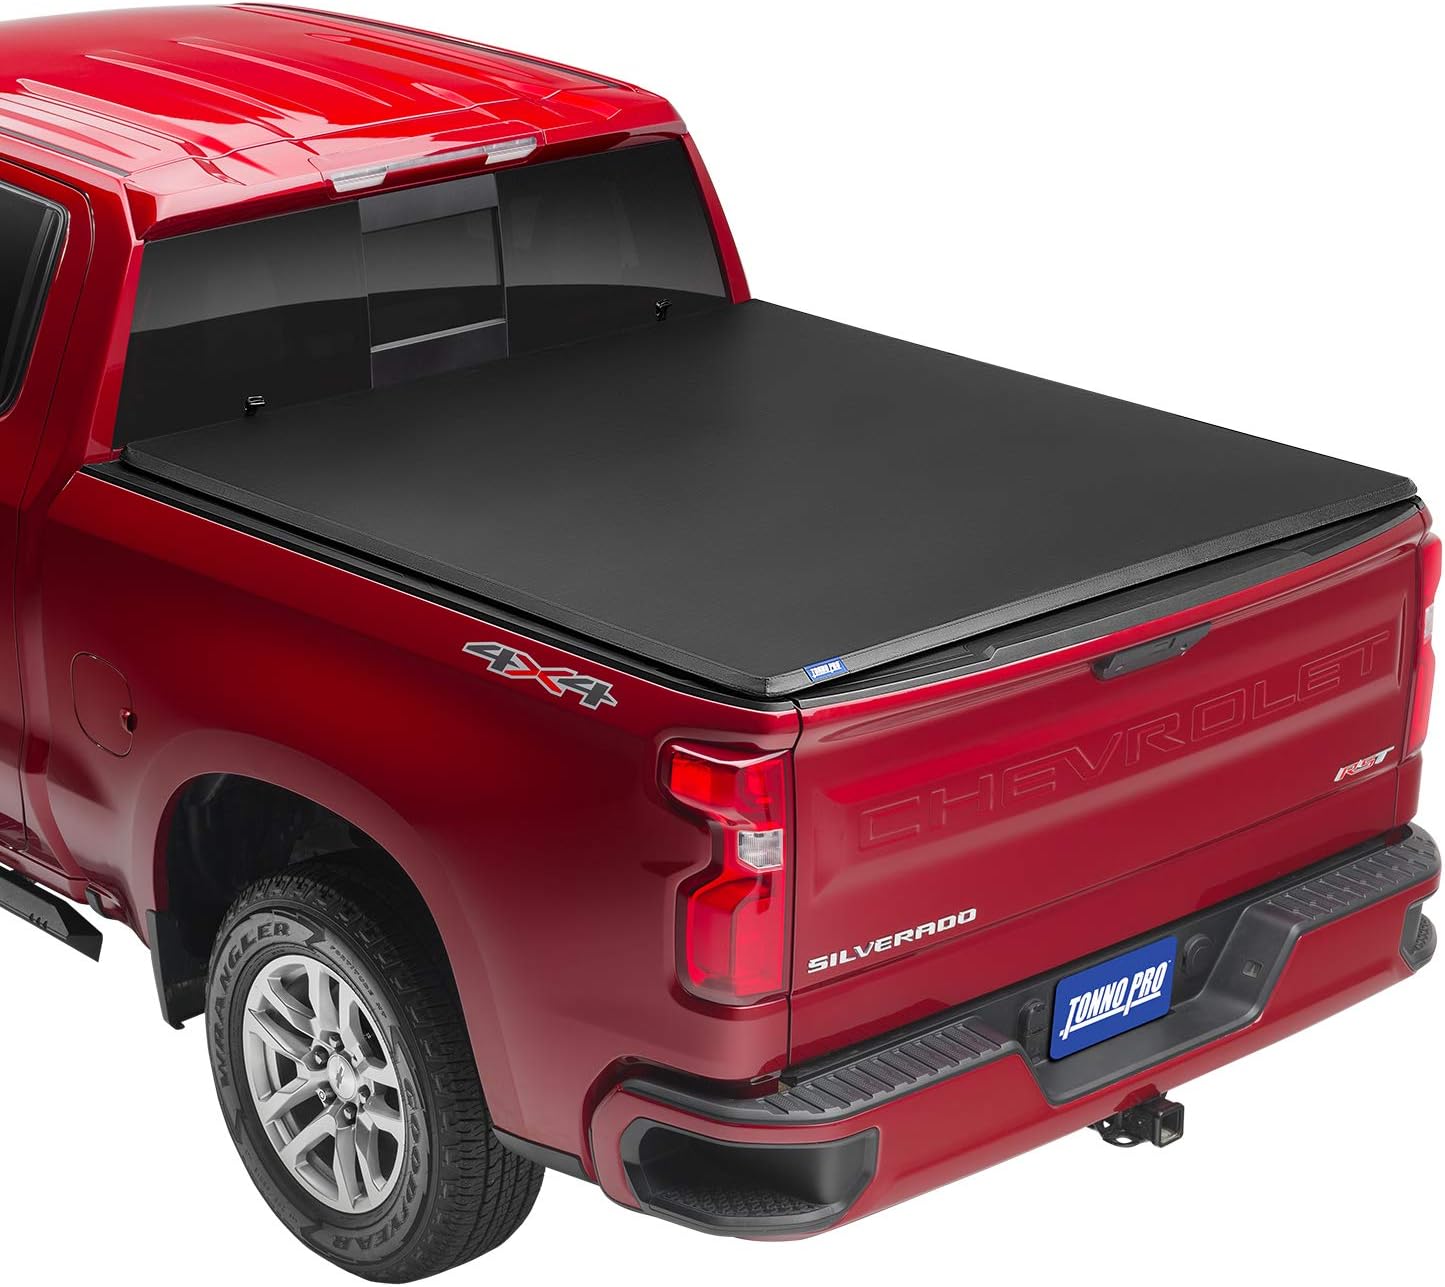 Tonno Pro Soft Tri-Fold Tonneau Cover |42-100 | for 88-07 Chevy/GMC Full Size Standard Short Bed 6.6'ft (Not Stepside) (07 Classic Body) TonnoFold Cover